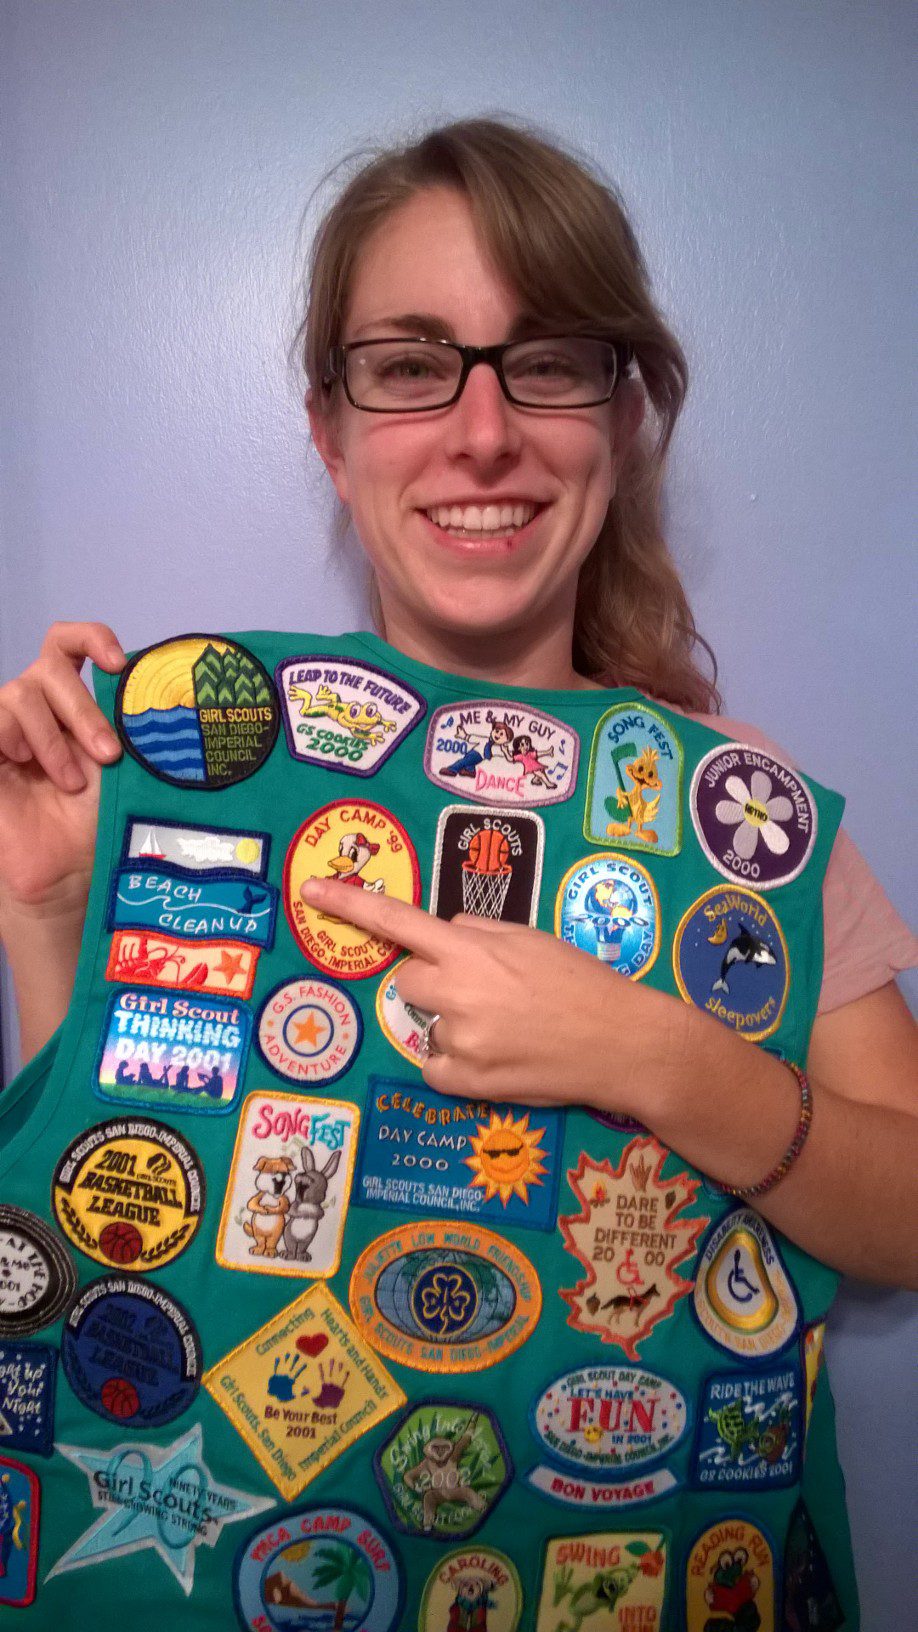 Emily poses proudly with her Girls Scout patch she received from ILACSD!